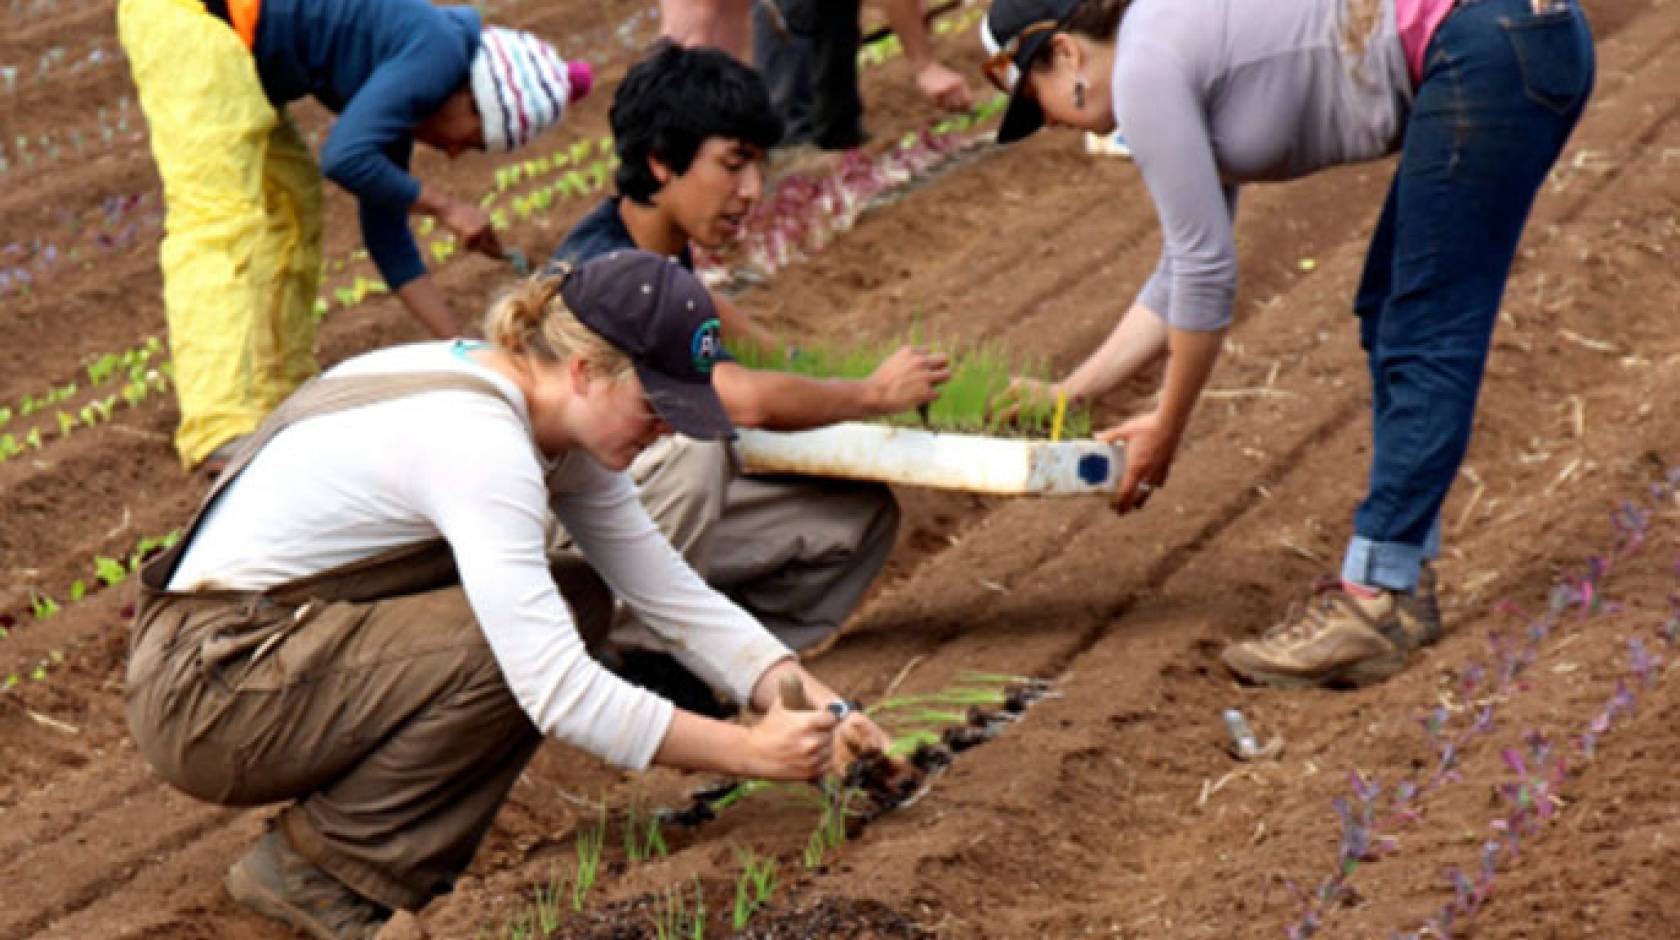 Apprentices in ecological horticulture at UC Santa Cruz learn organic farming and gardening during a six-month course of study and practice. Applications for the 2016 program are due Aug. 15 for international applicants and Sept. 30 for U.S. citizens.